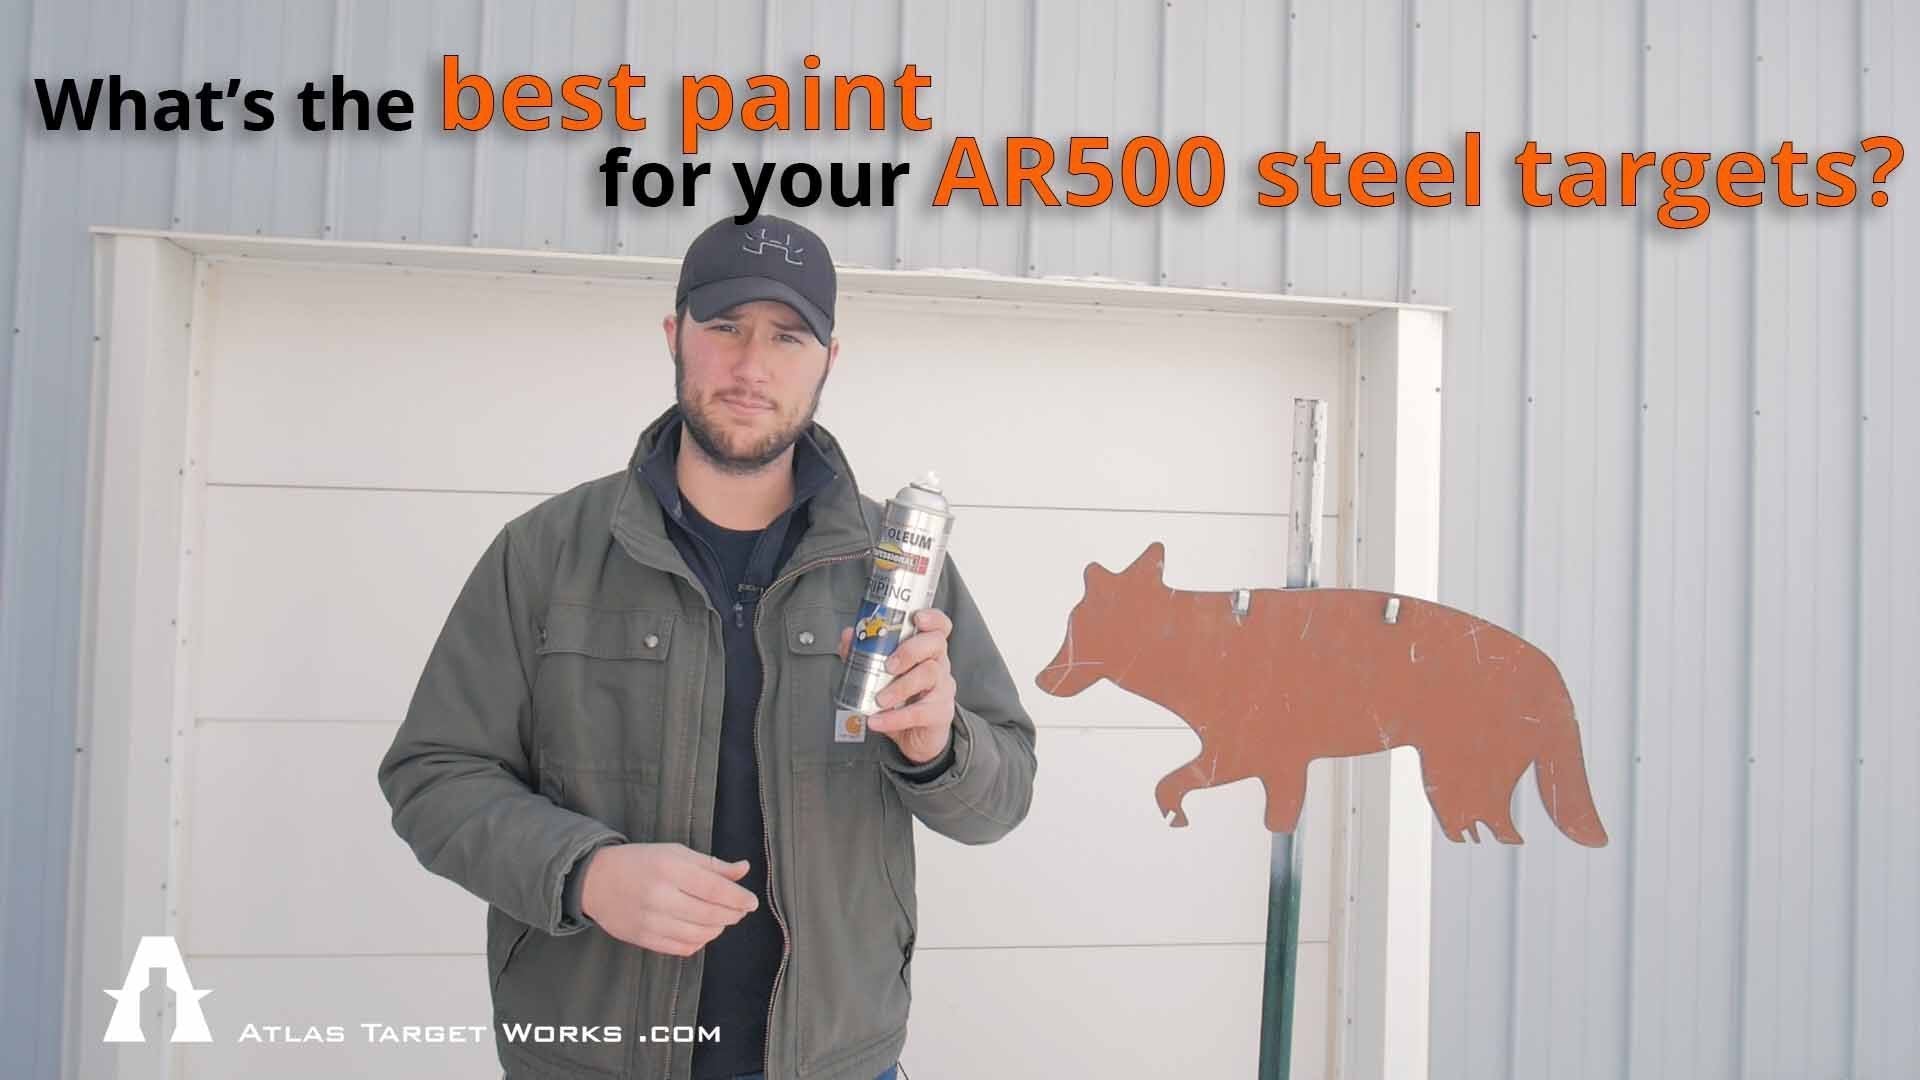 What is the best paint for AR500 steel targets?